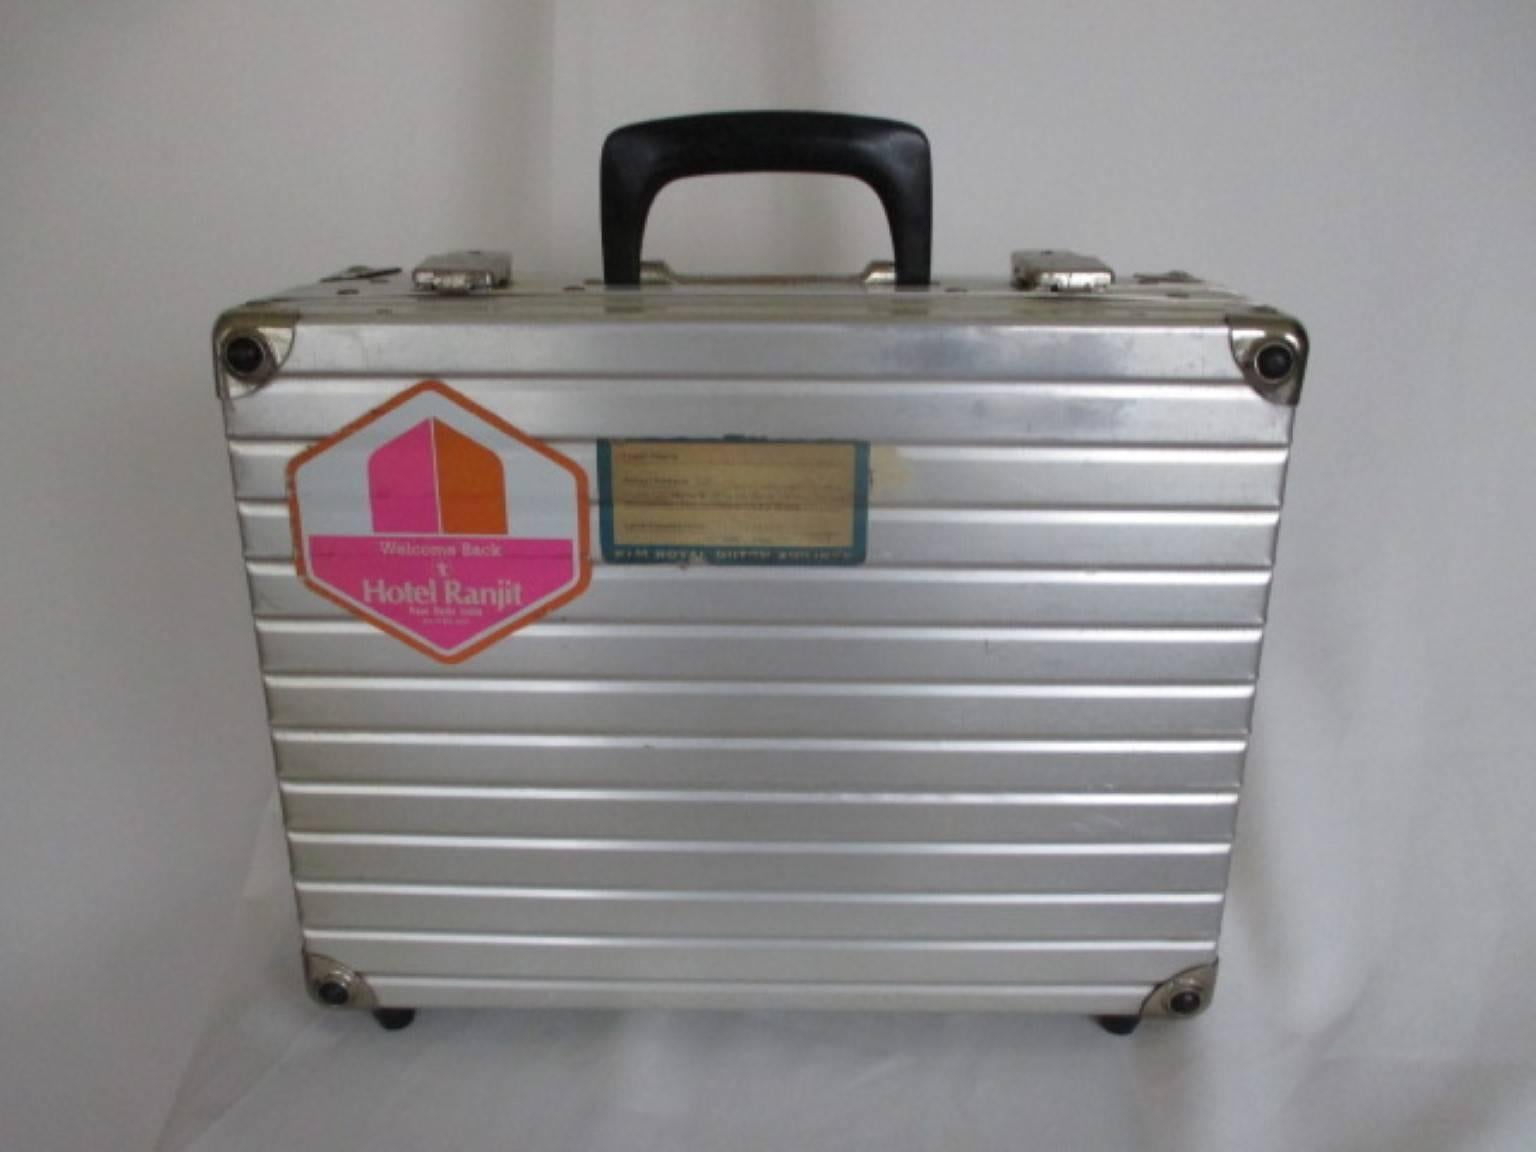 Used vintage Luggage aluminium suitcase, famous for dj traveling the world.
size is 28 cm x 37cm x 13 cm
Please note that vintage items are not new and therefore might have minor imperfections.